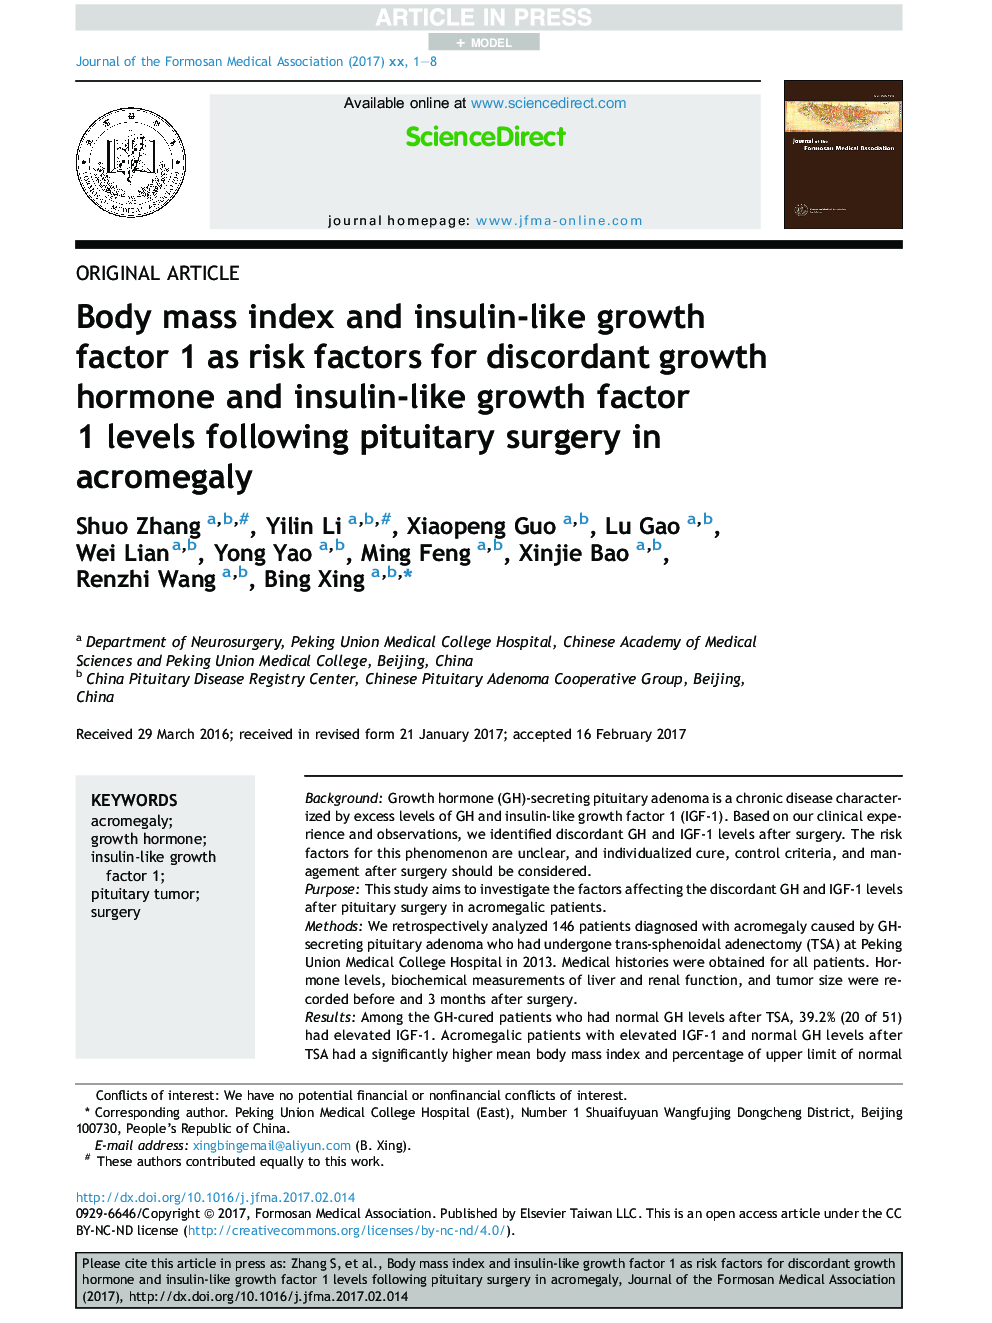 Body mass index and insulin-like growth factor 1 as risk factors for discordant growth hormone and insulin-like growth factor 1Â levels following pituitary surgery in acromegaly